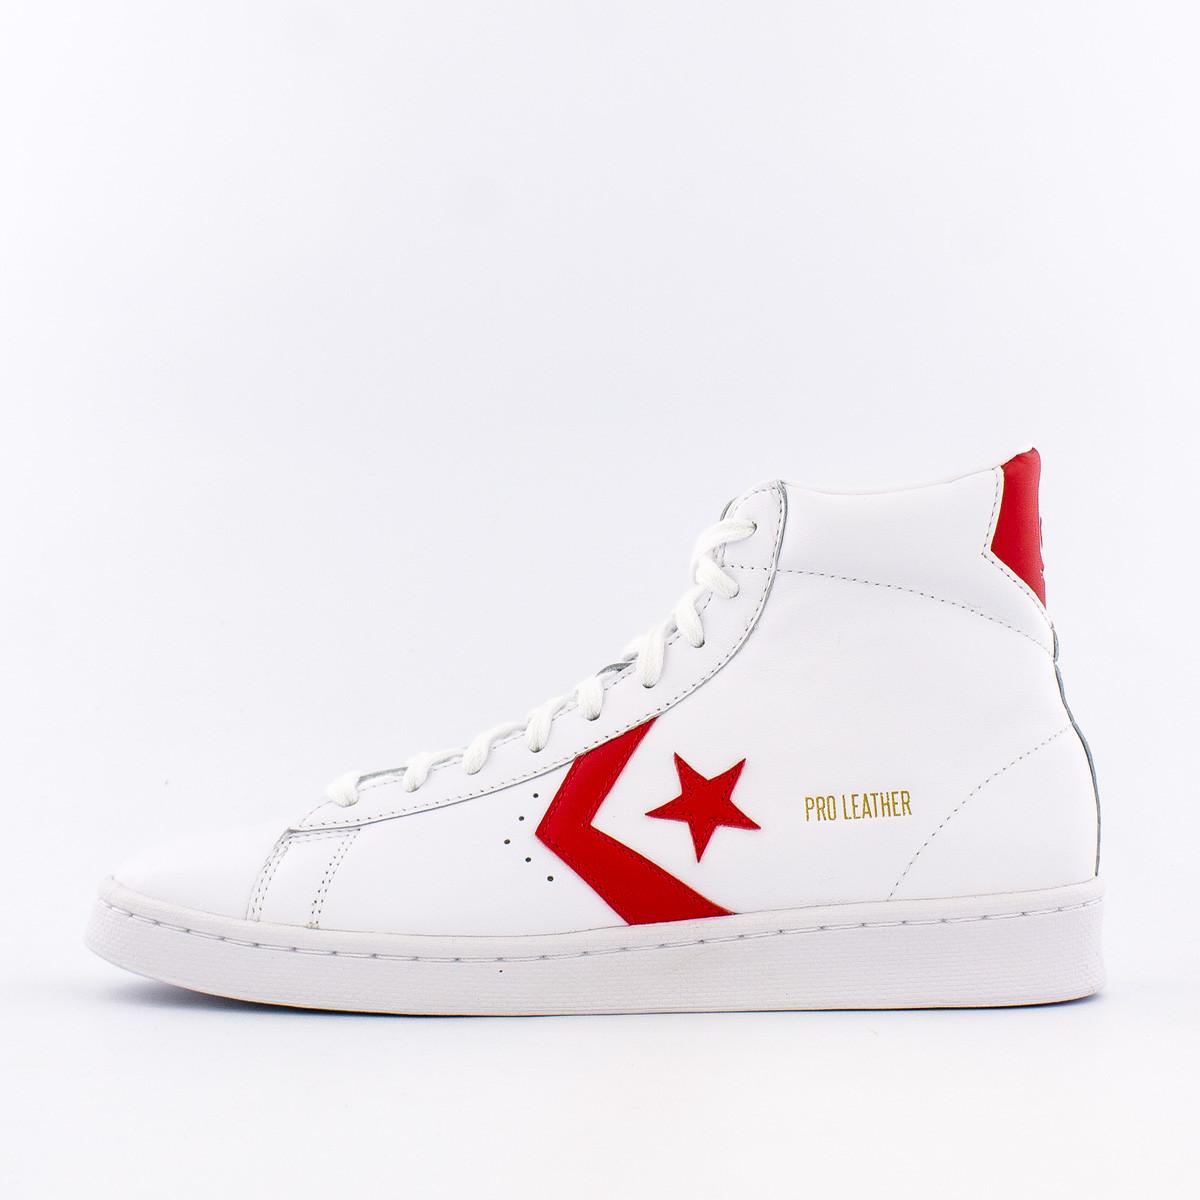 Converse Pro Leather Mid Casual Basketball Shoes in White/Red (White ...